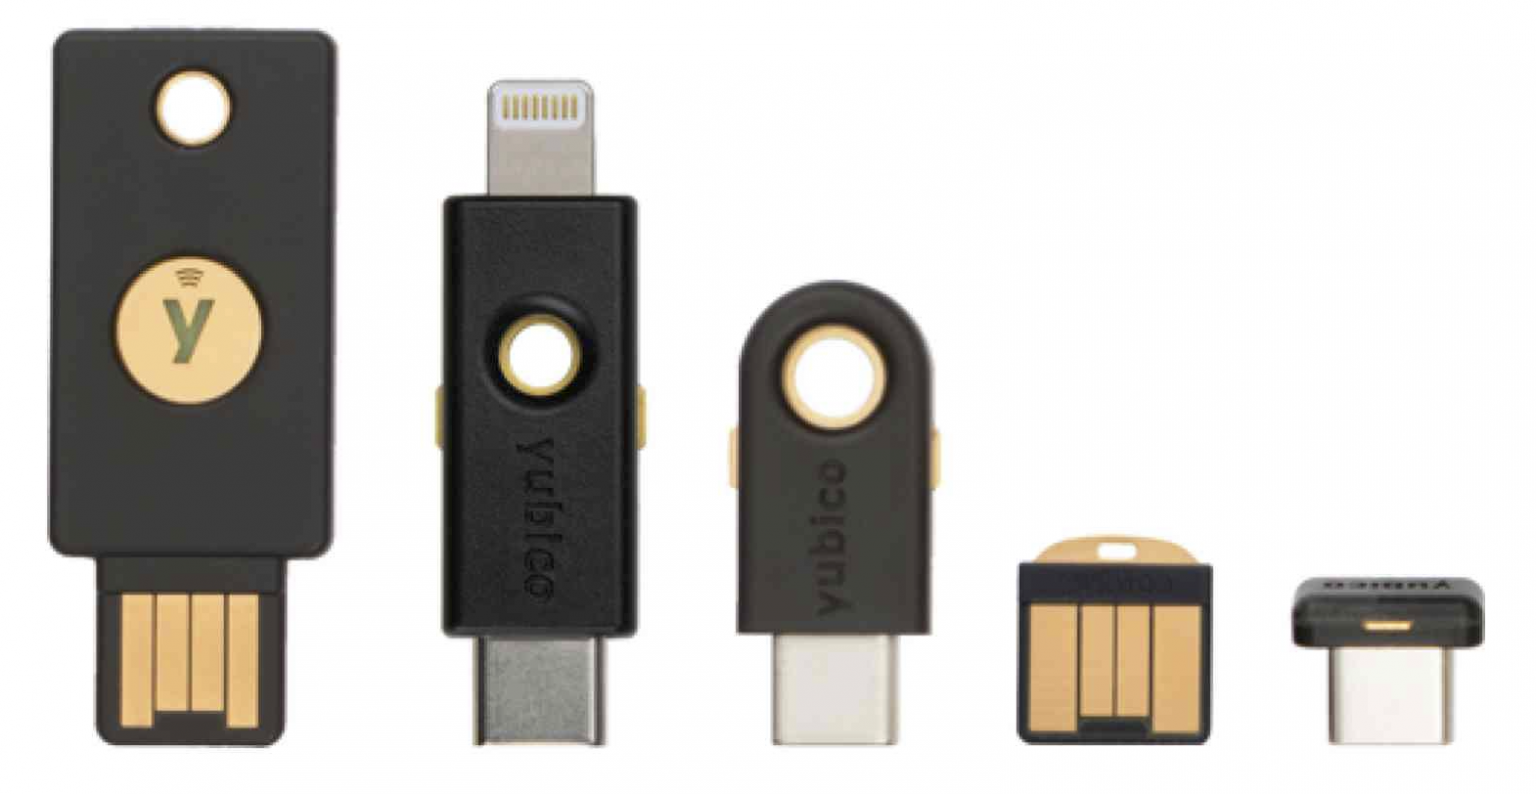 duo with yubikey